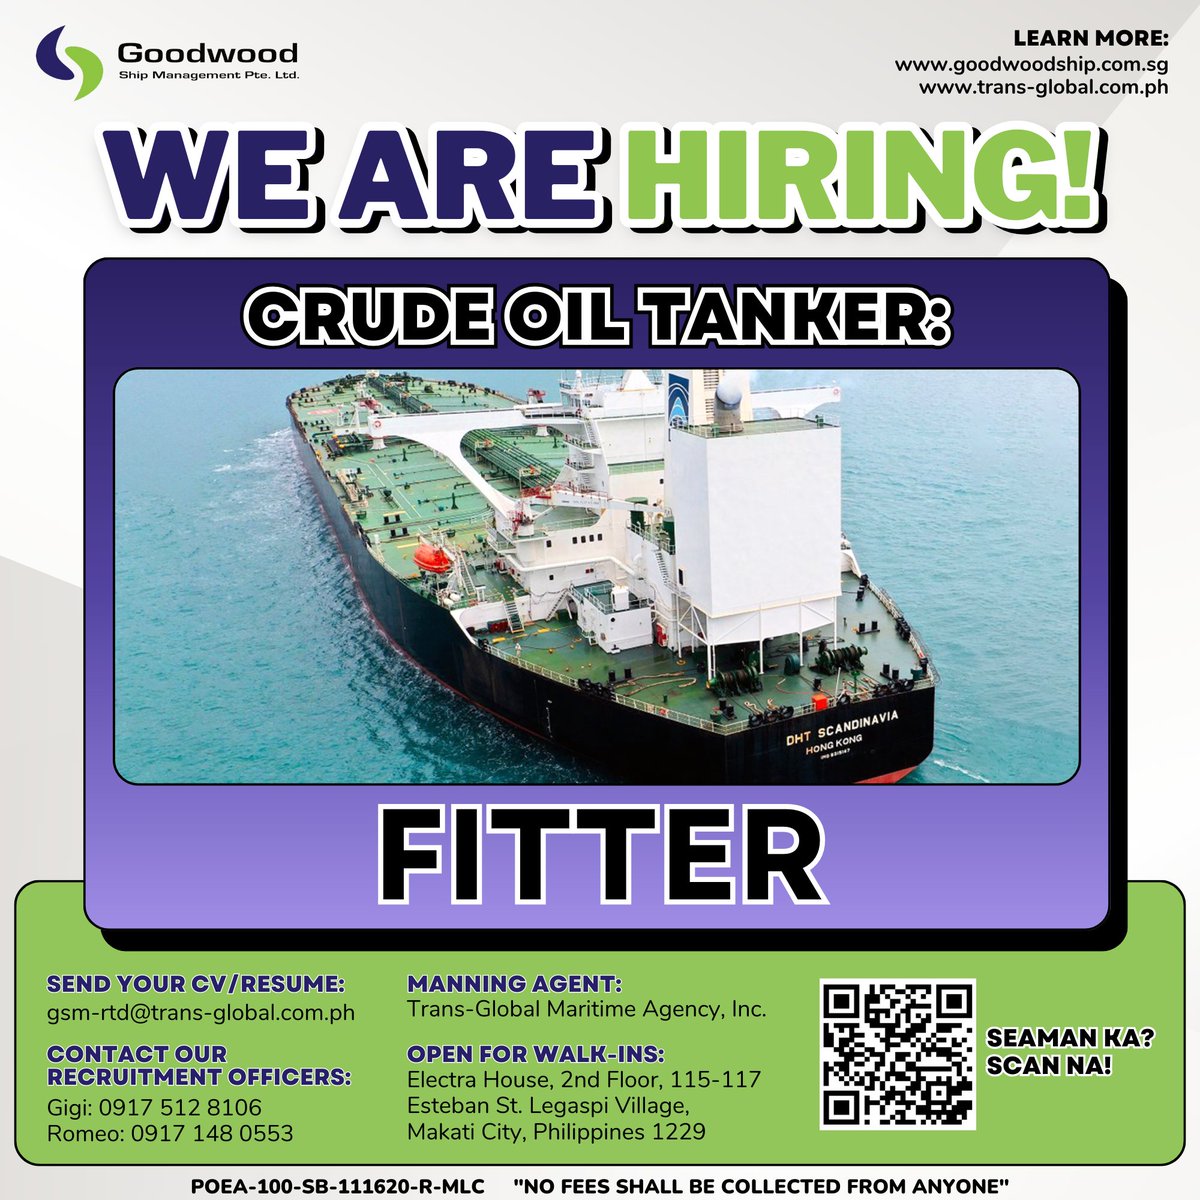 📢 WE ARE HIRING!

Acquire more essential skills onboard with Goodwood Ship Management!

Send your CV/Resume:
gsm-rtd@trans-global.com.ph

POEA-100-SB-111620-R-MLC 'NO FEES SHALL BE COLLECTED FROM ANYONE' #hiring #careeratsea #maritimejobs #transglobalmaritime